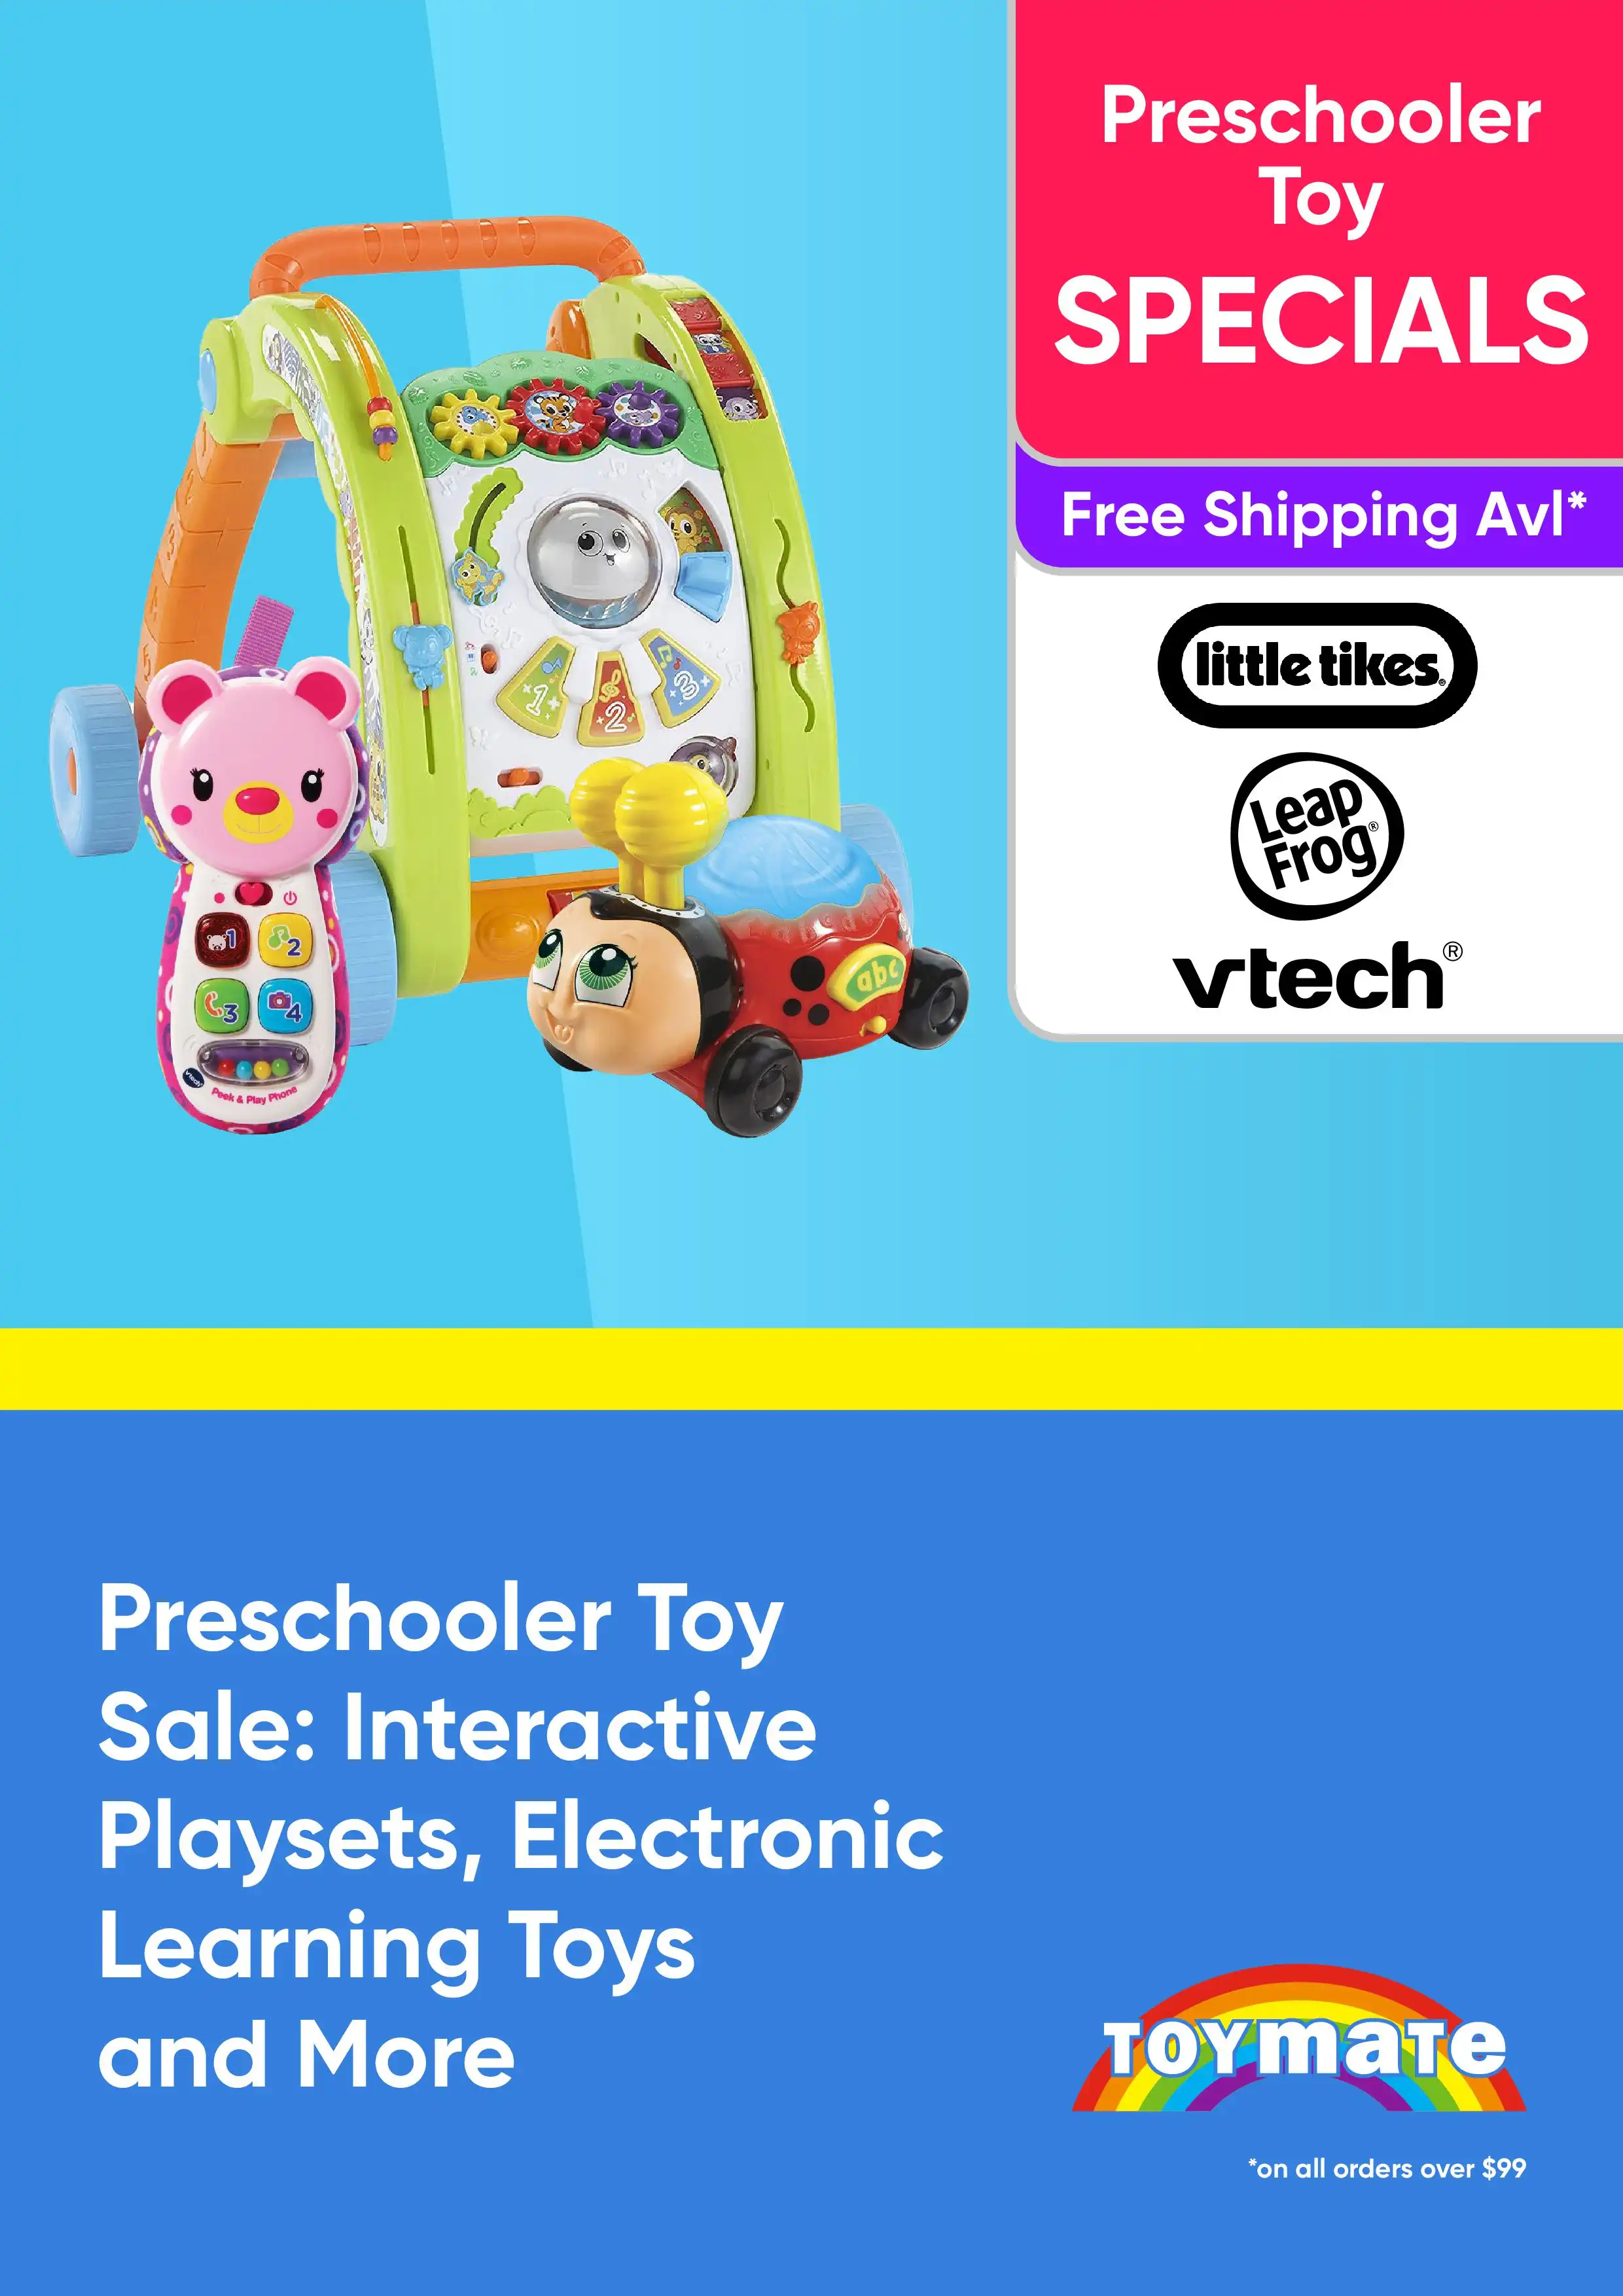 Preschooler Toy Sale: Interactive Playsets, Electronic Learning Toys and More - Little Tikes, Leap Frog, VTech